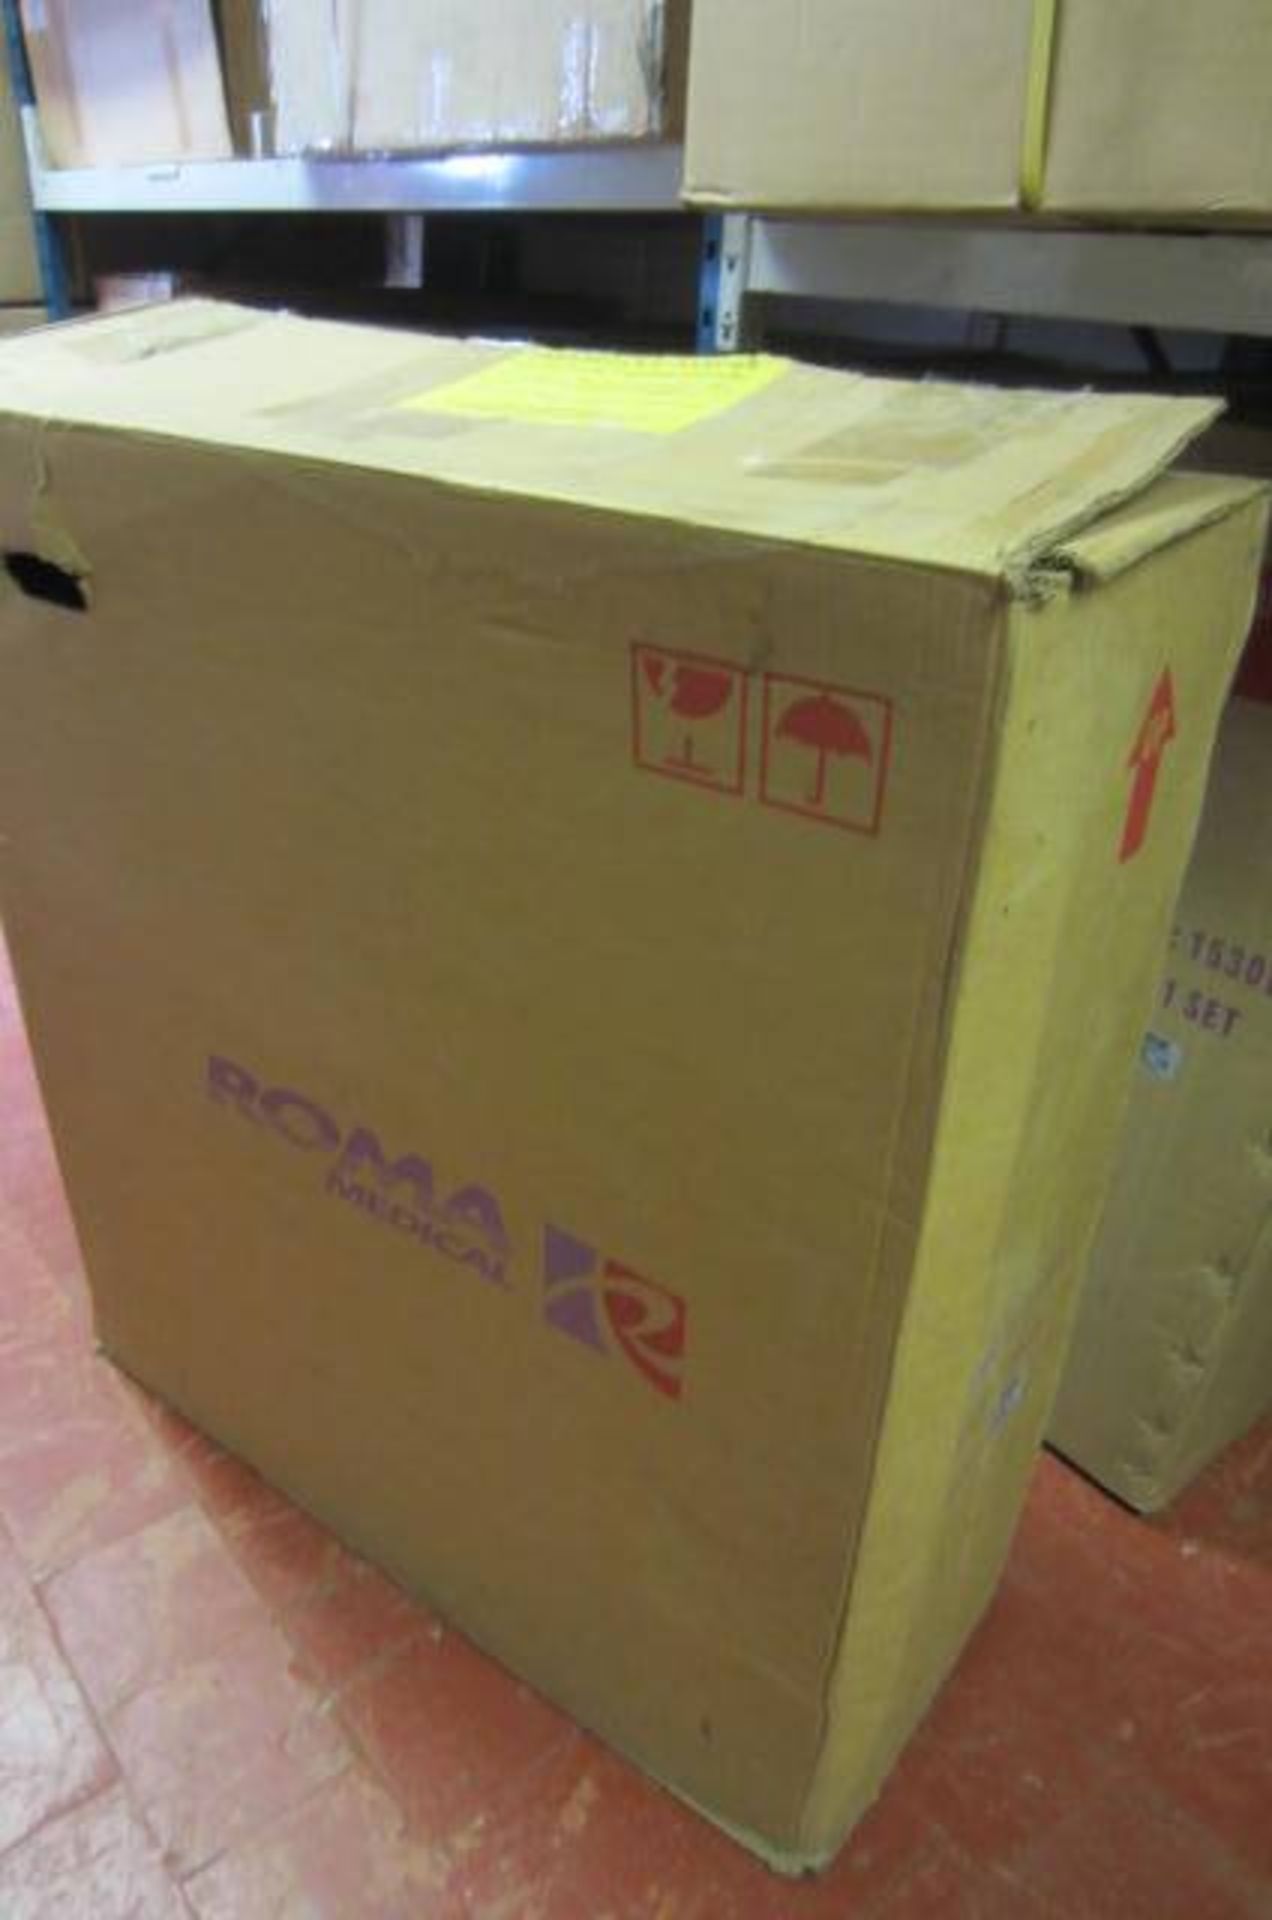 Roma Medical Heavy Duty Self Propelled Wheel Chair, Model 1472X. In Box as New. RRP £246.00 - Image 3 of 3